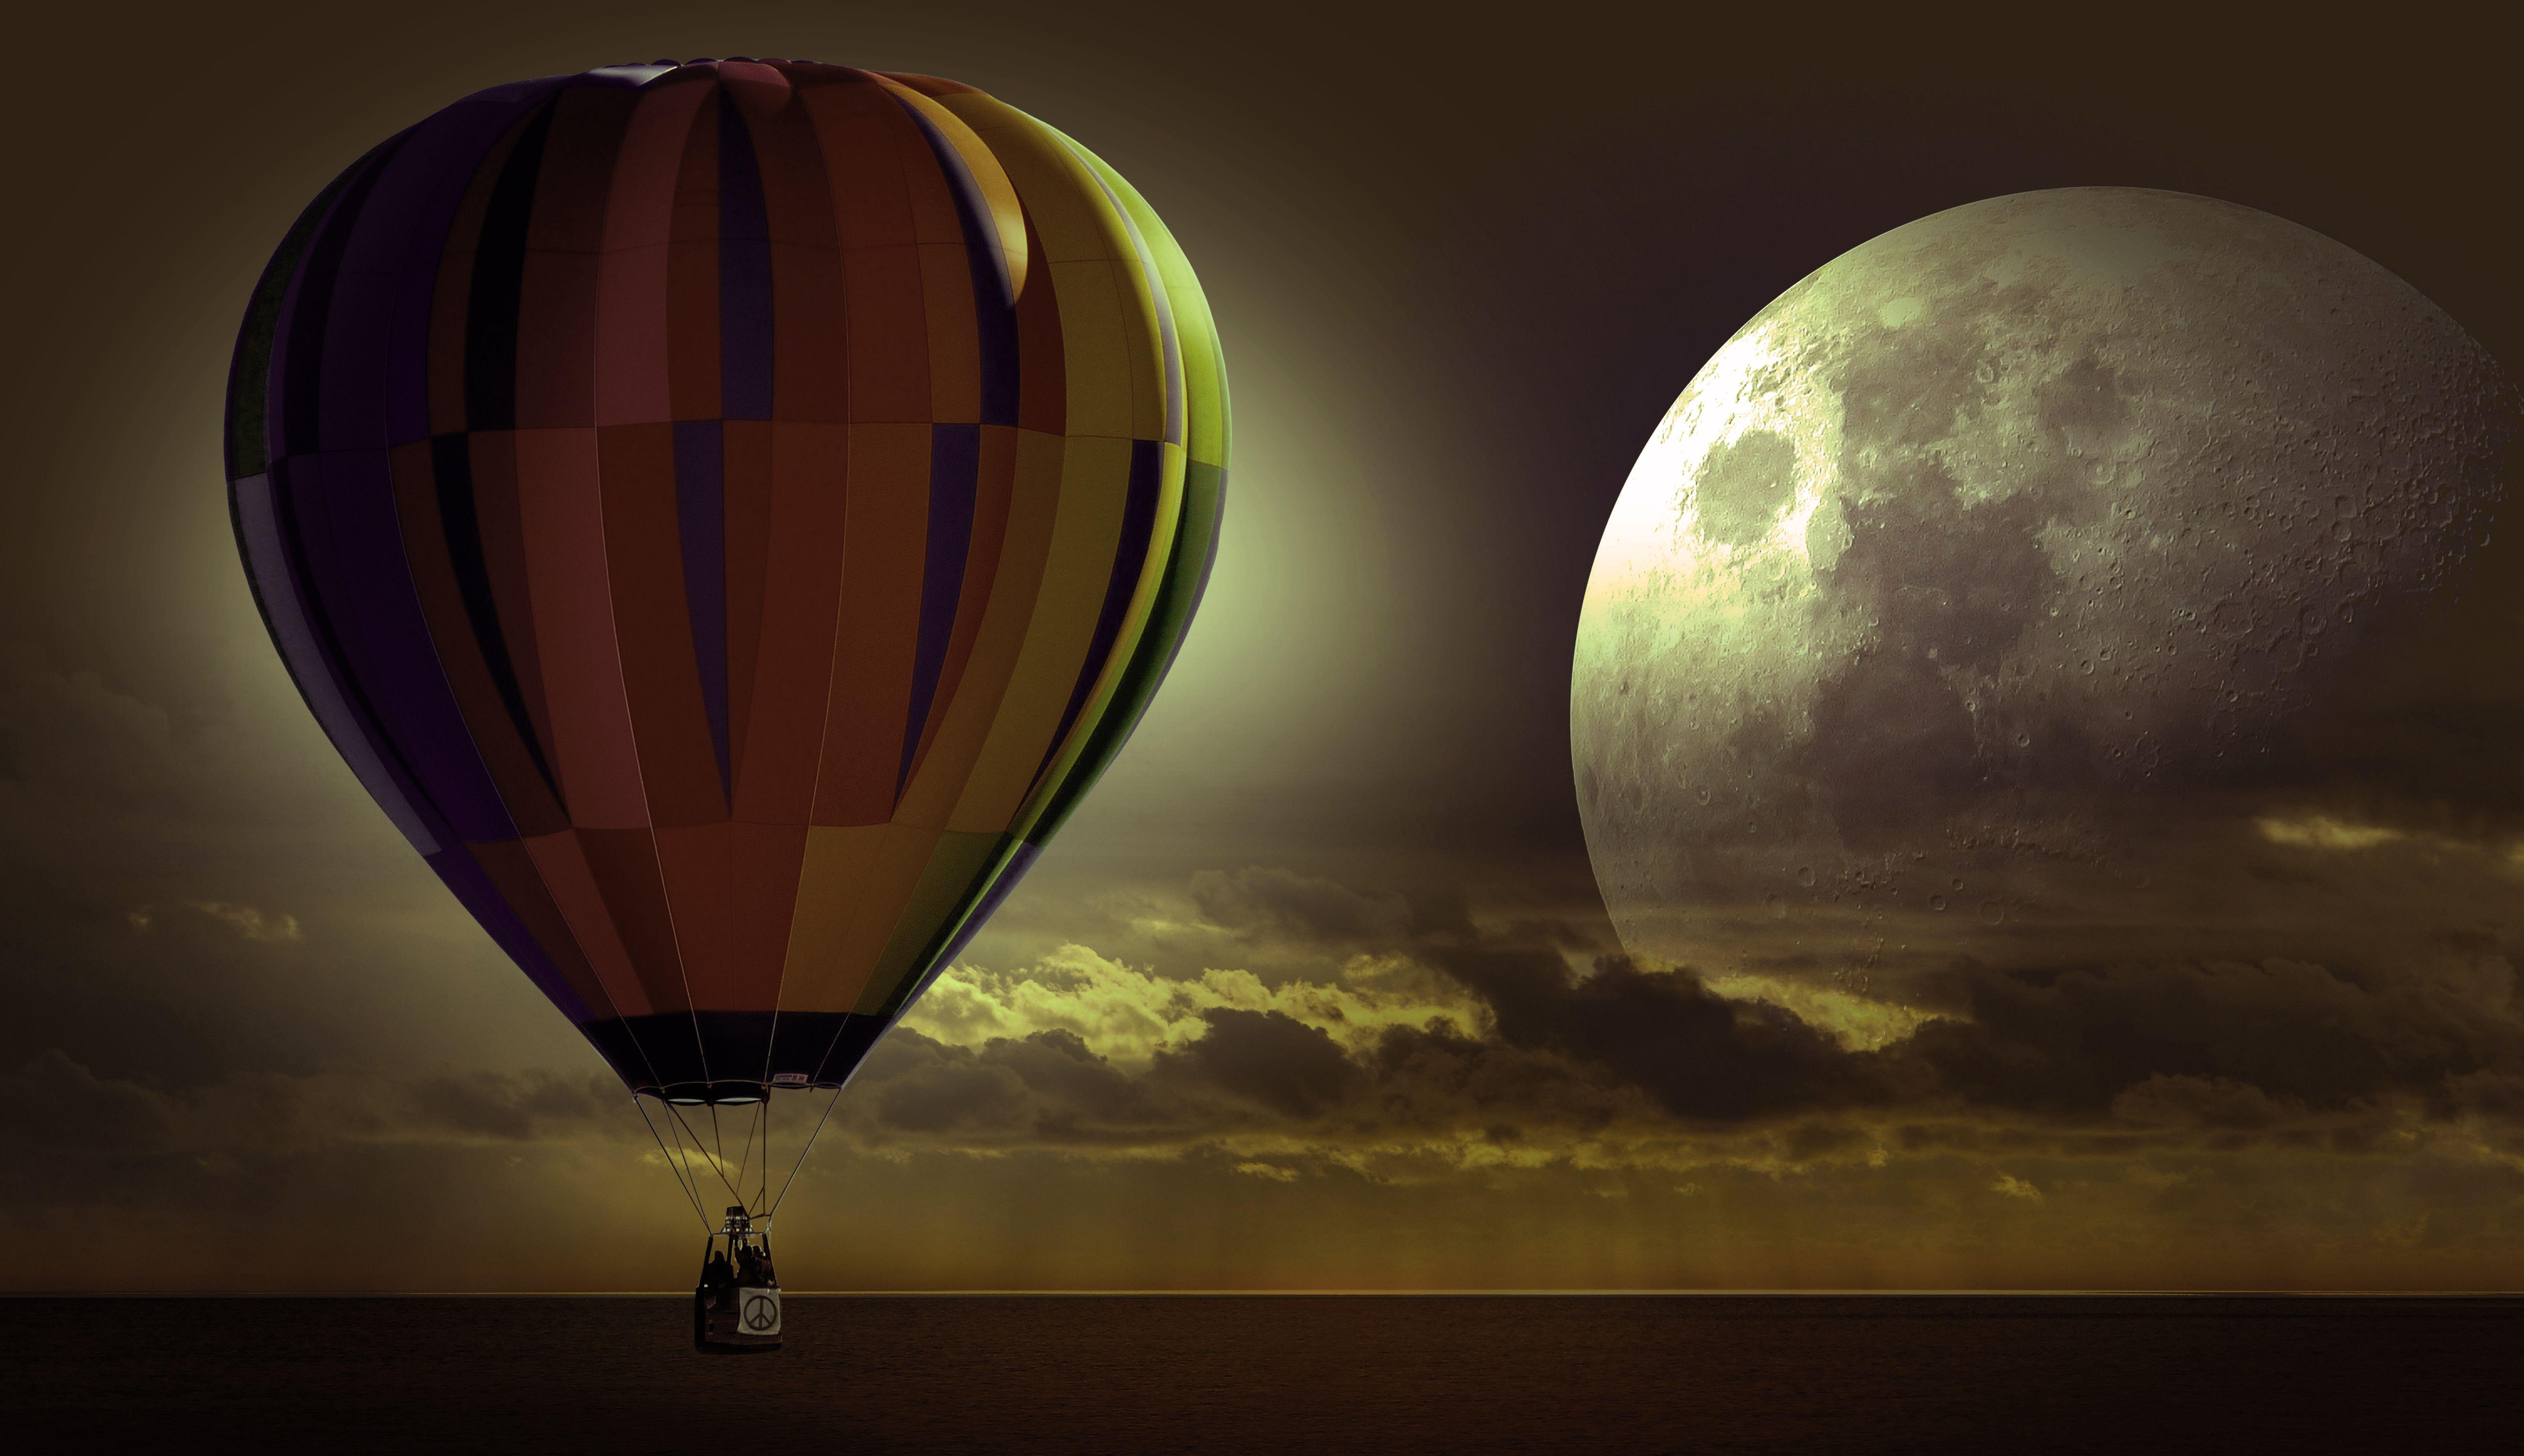 Hot Air Balloon In High At Sky With Full Moon. Awesome Image